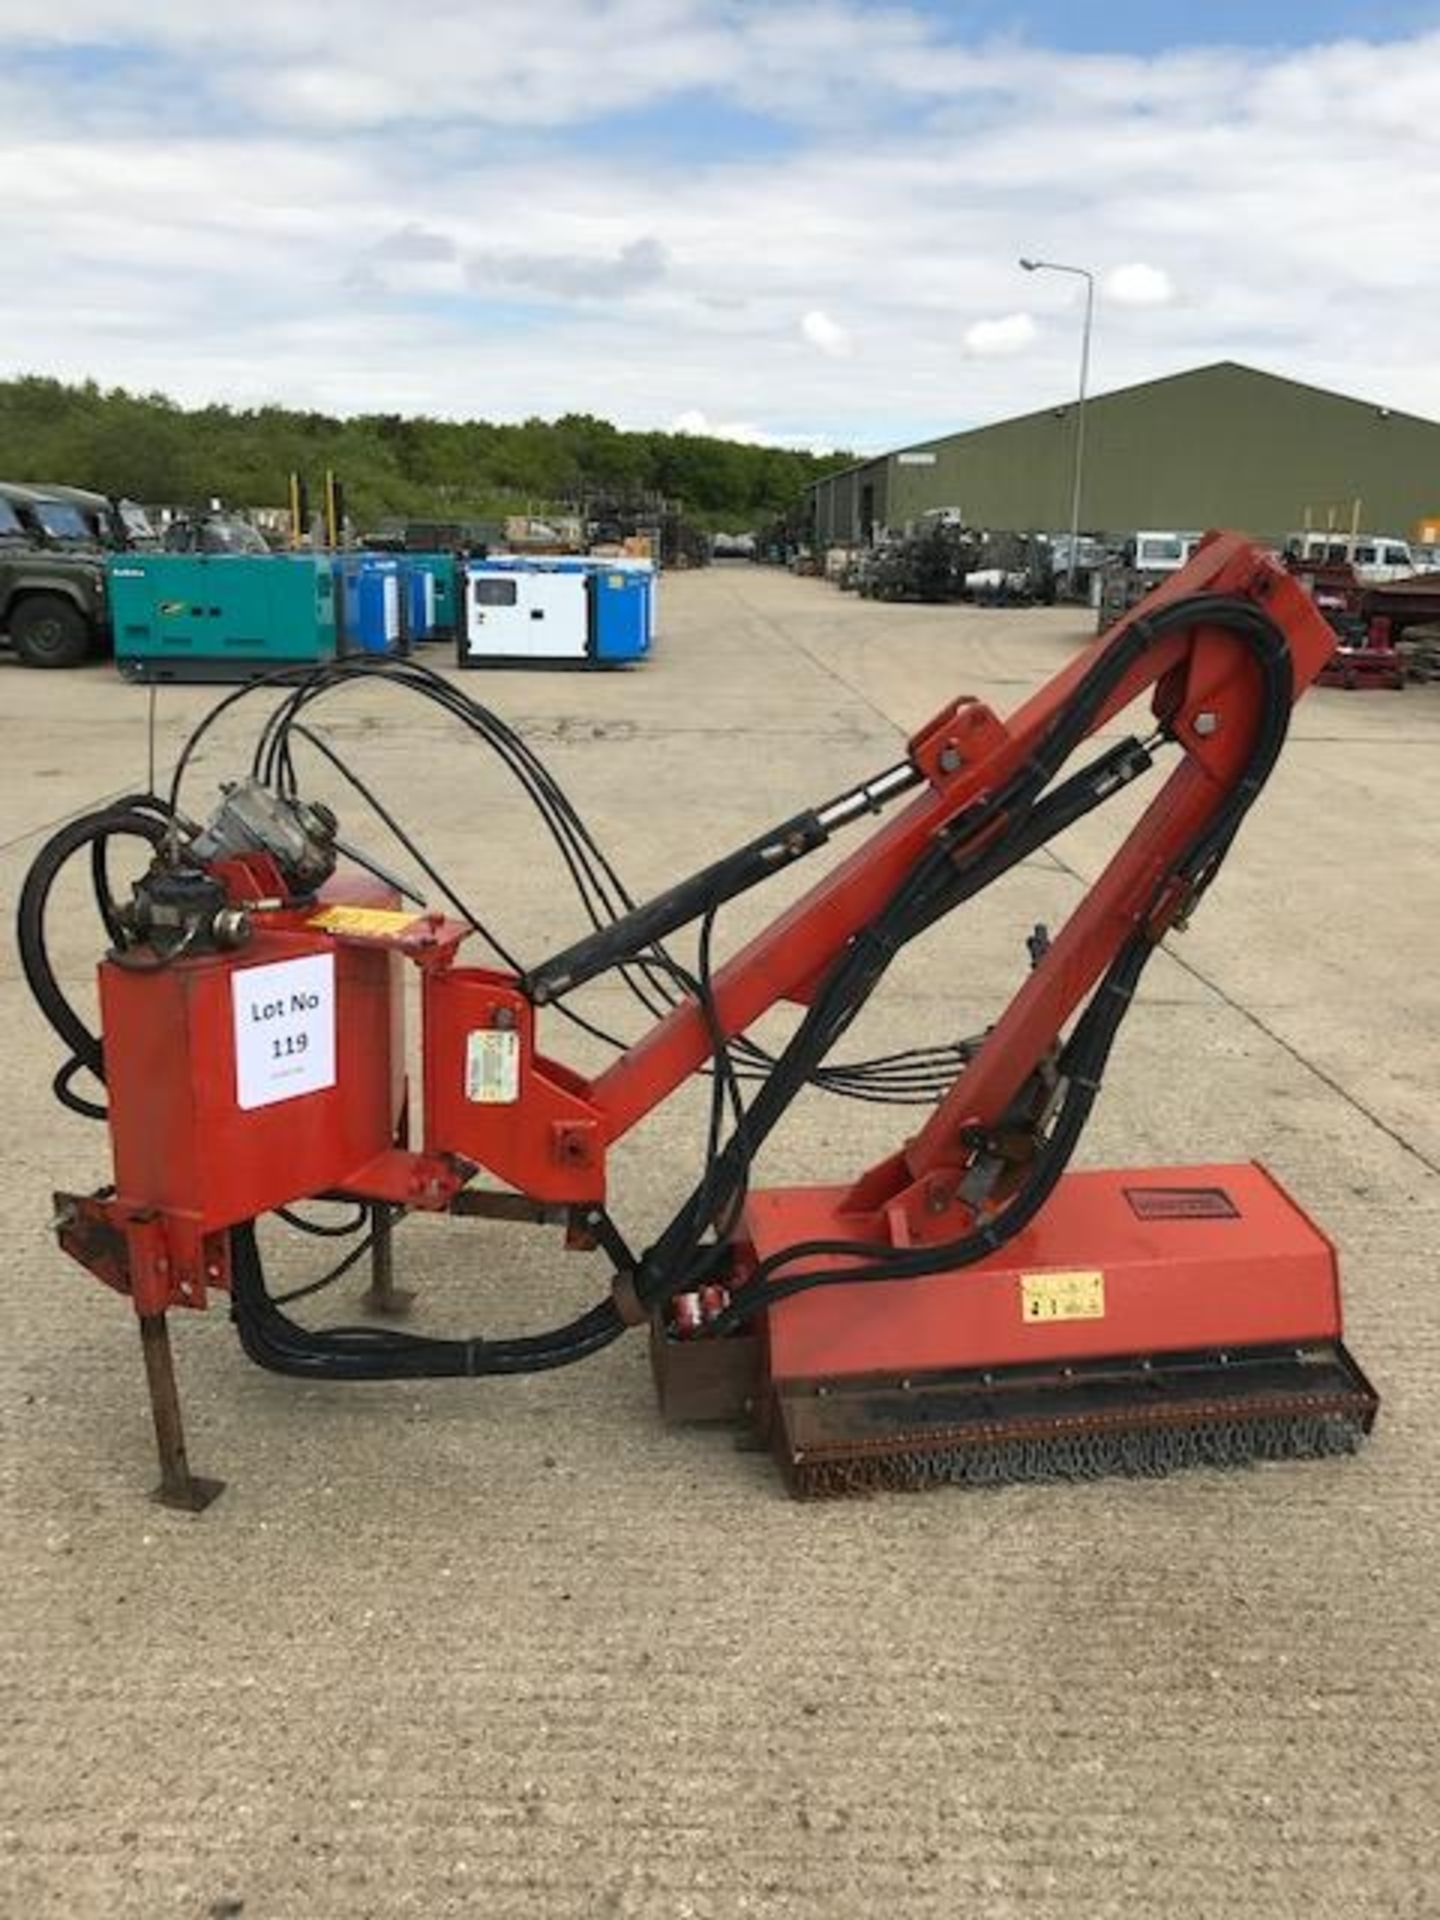 PROCOMAS PTO Driven Hydraulic Flail Hedge Cutter/Mower to suit 3 point Linkage